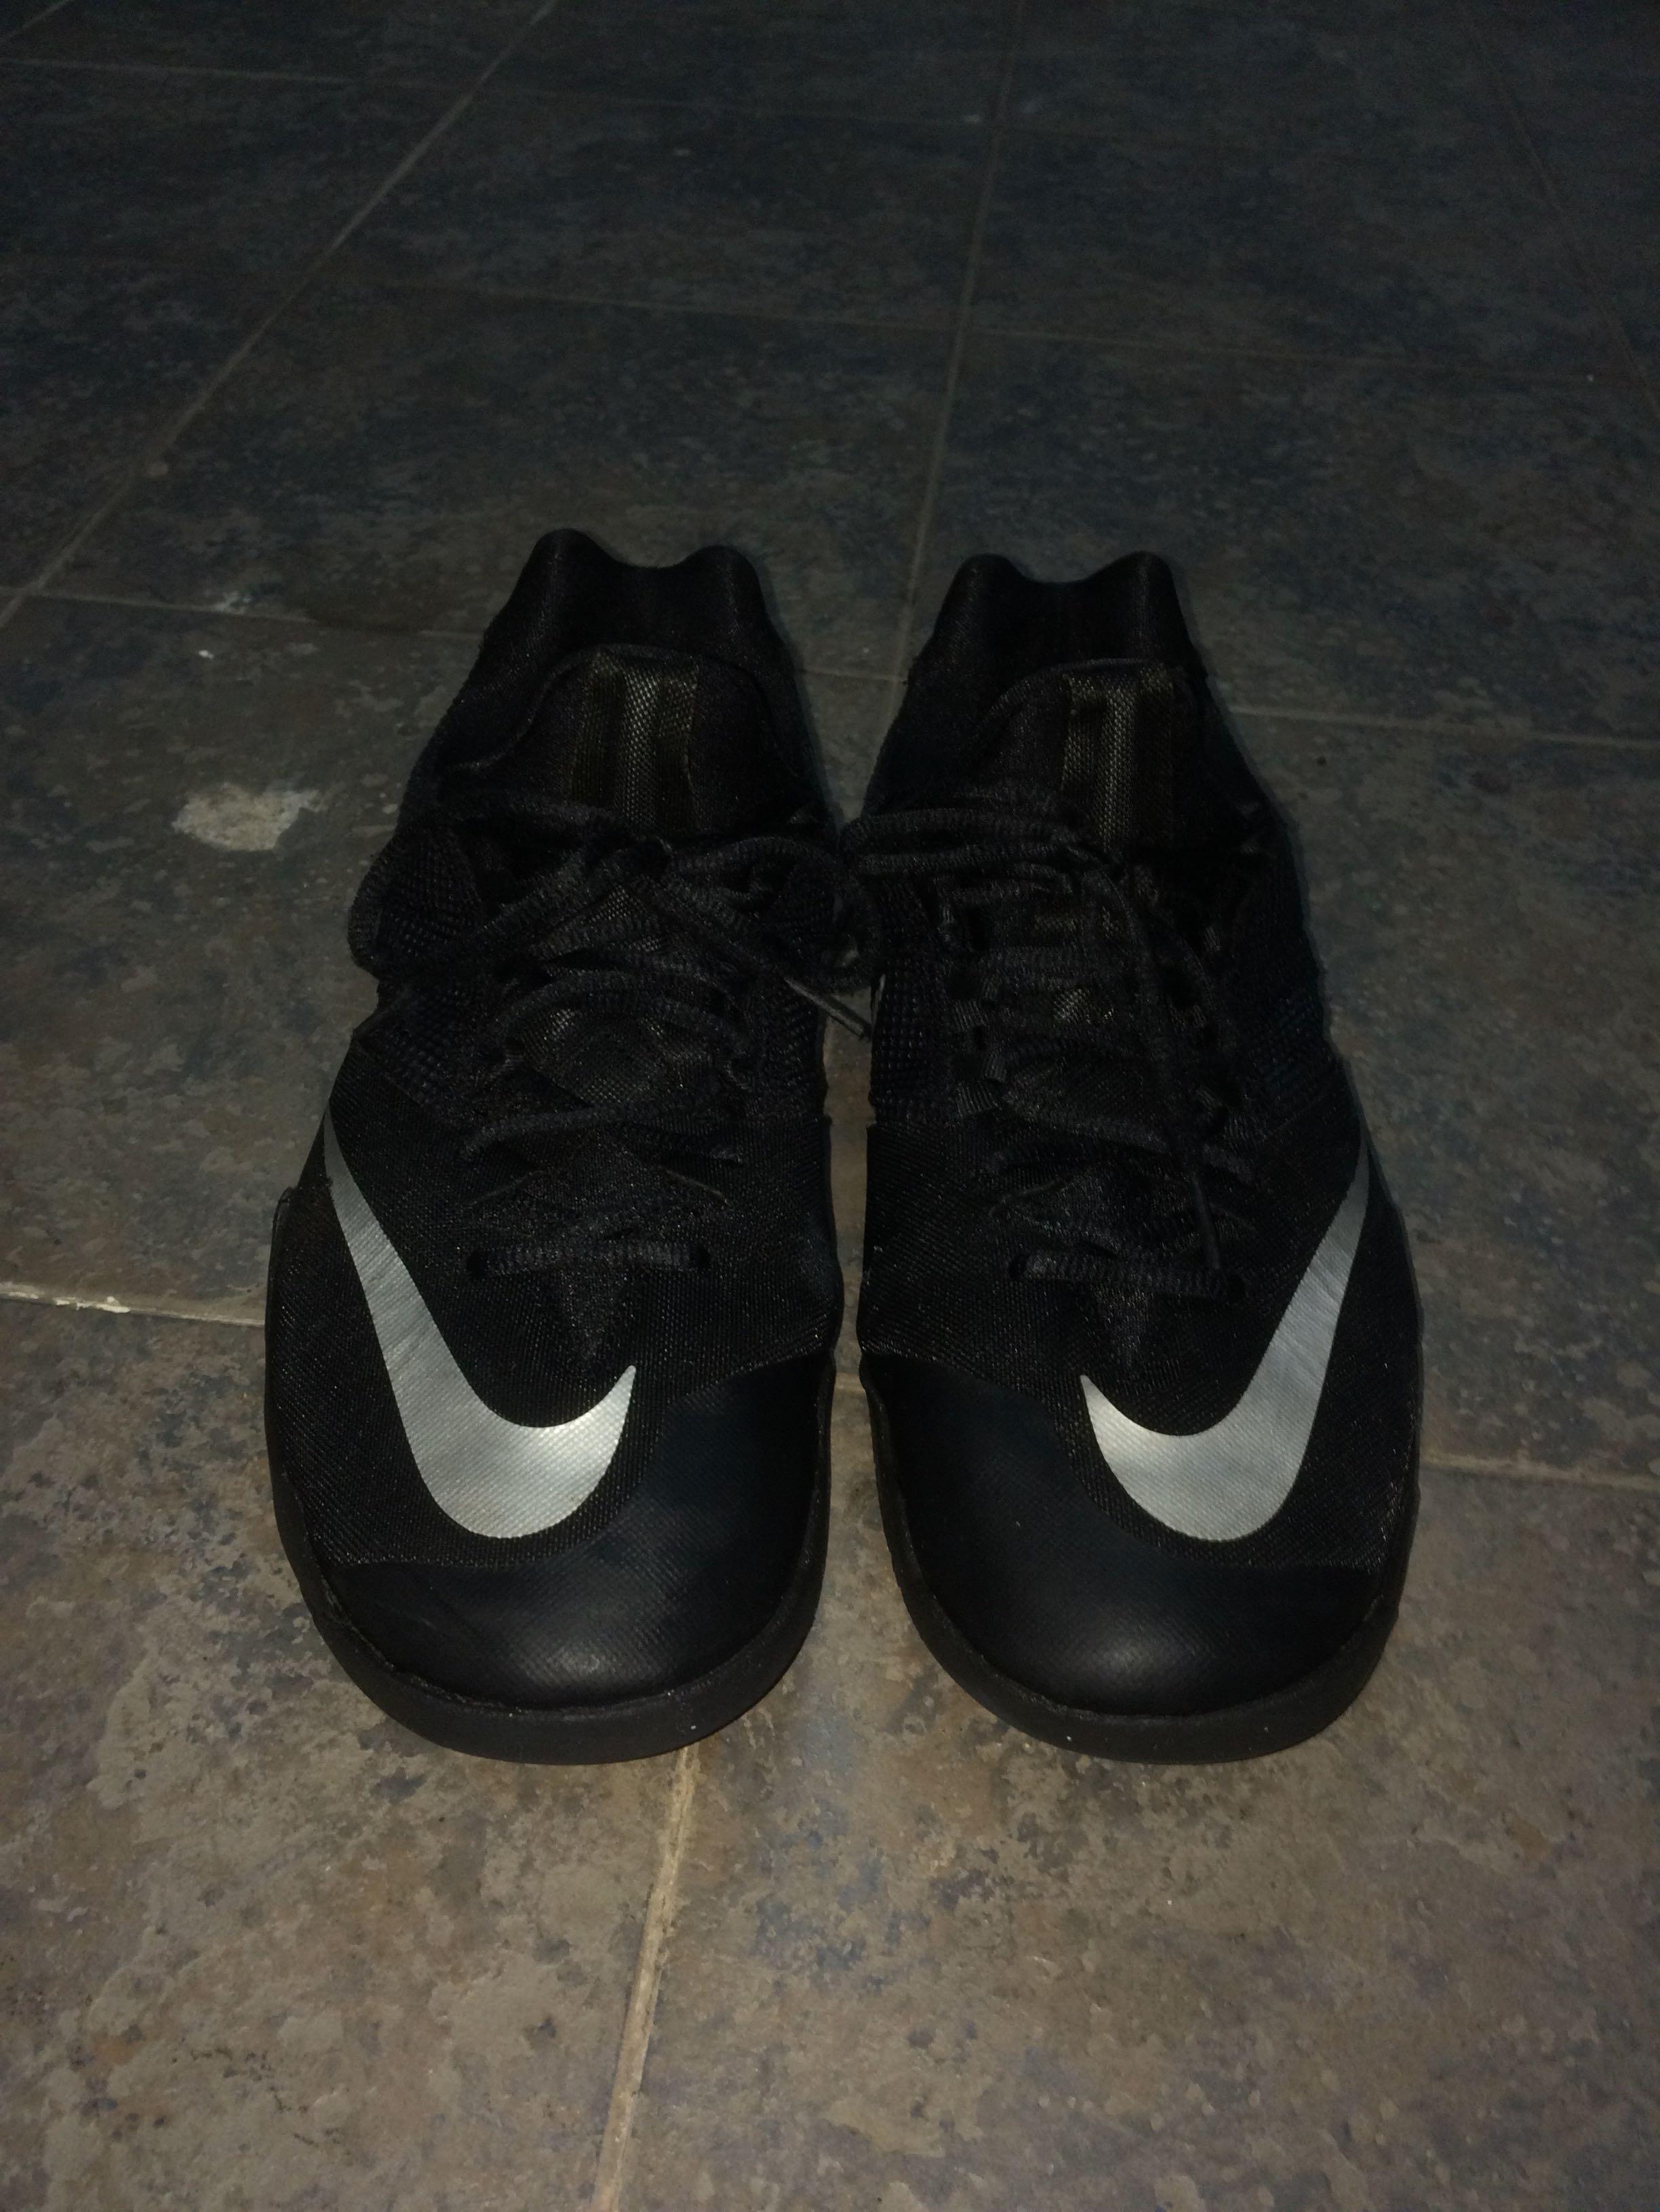 nike zoom low cut basketball shoes